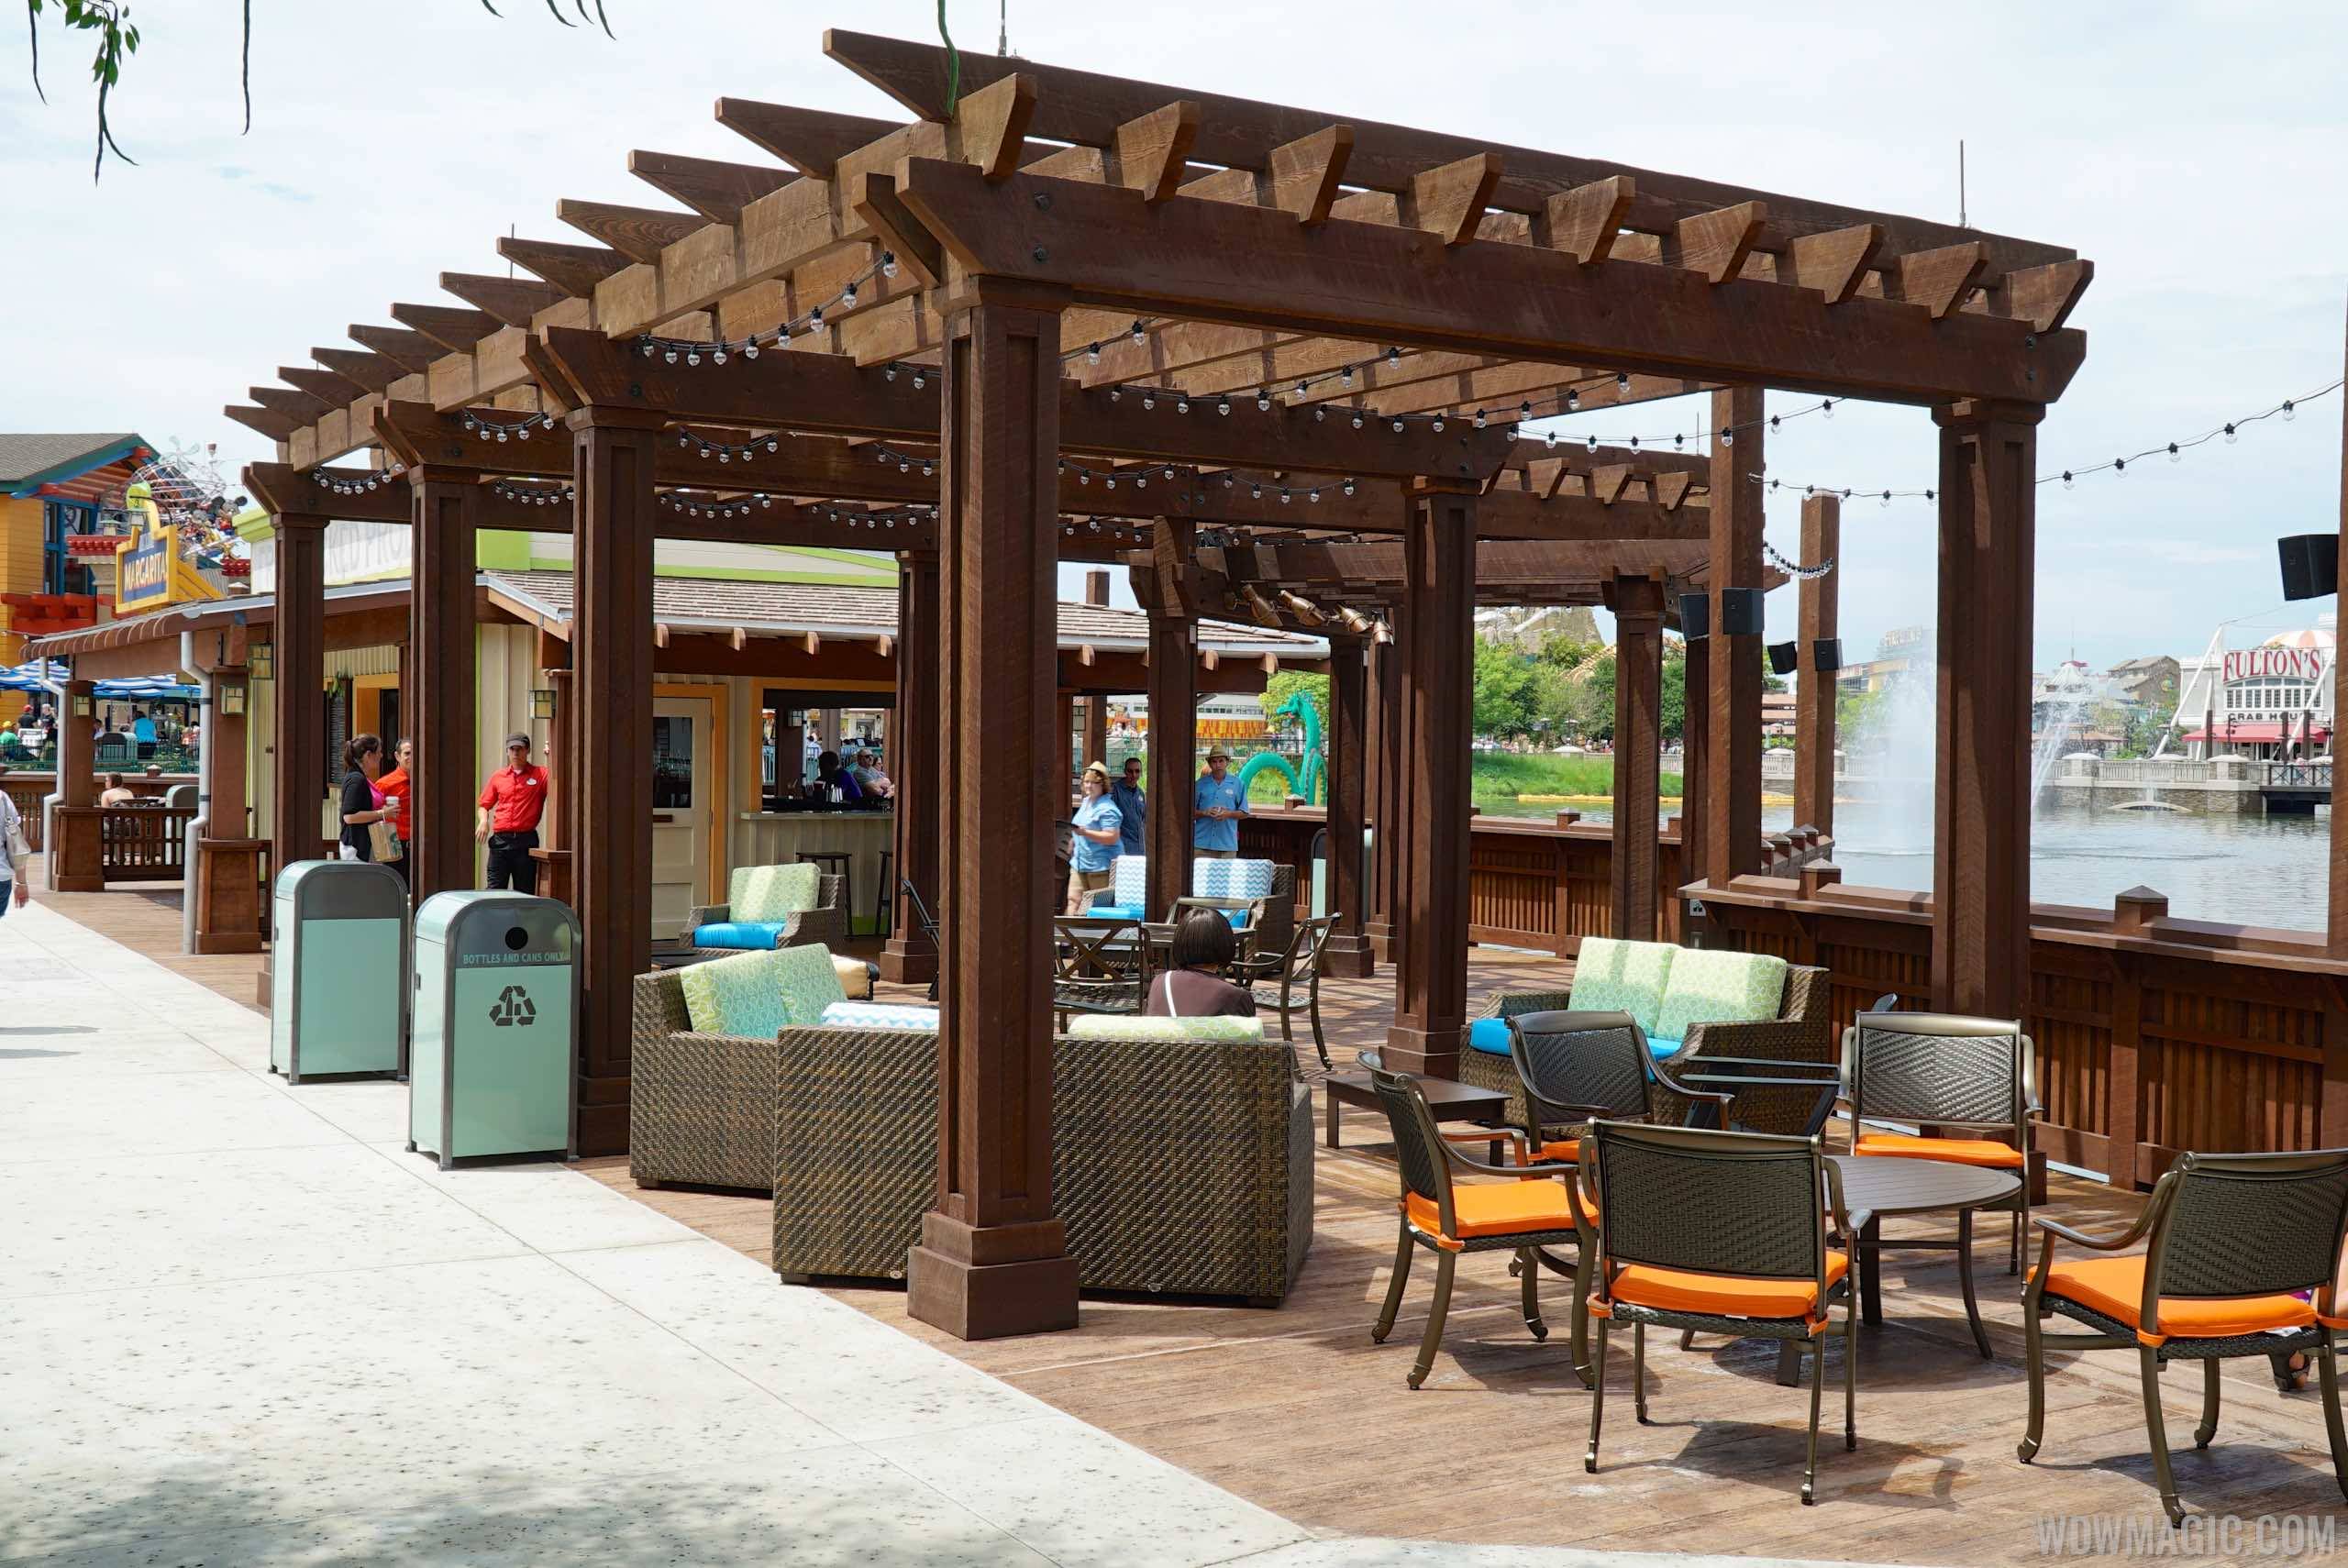 PHOTOS - Dockside Margaritas now open at The Marketplace